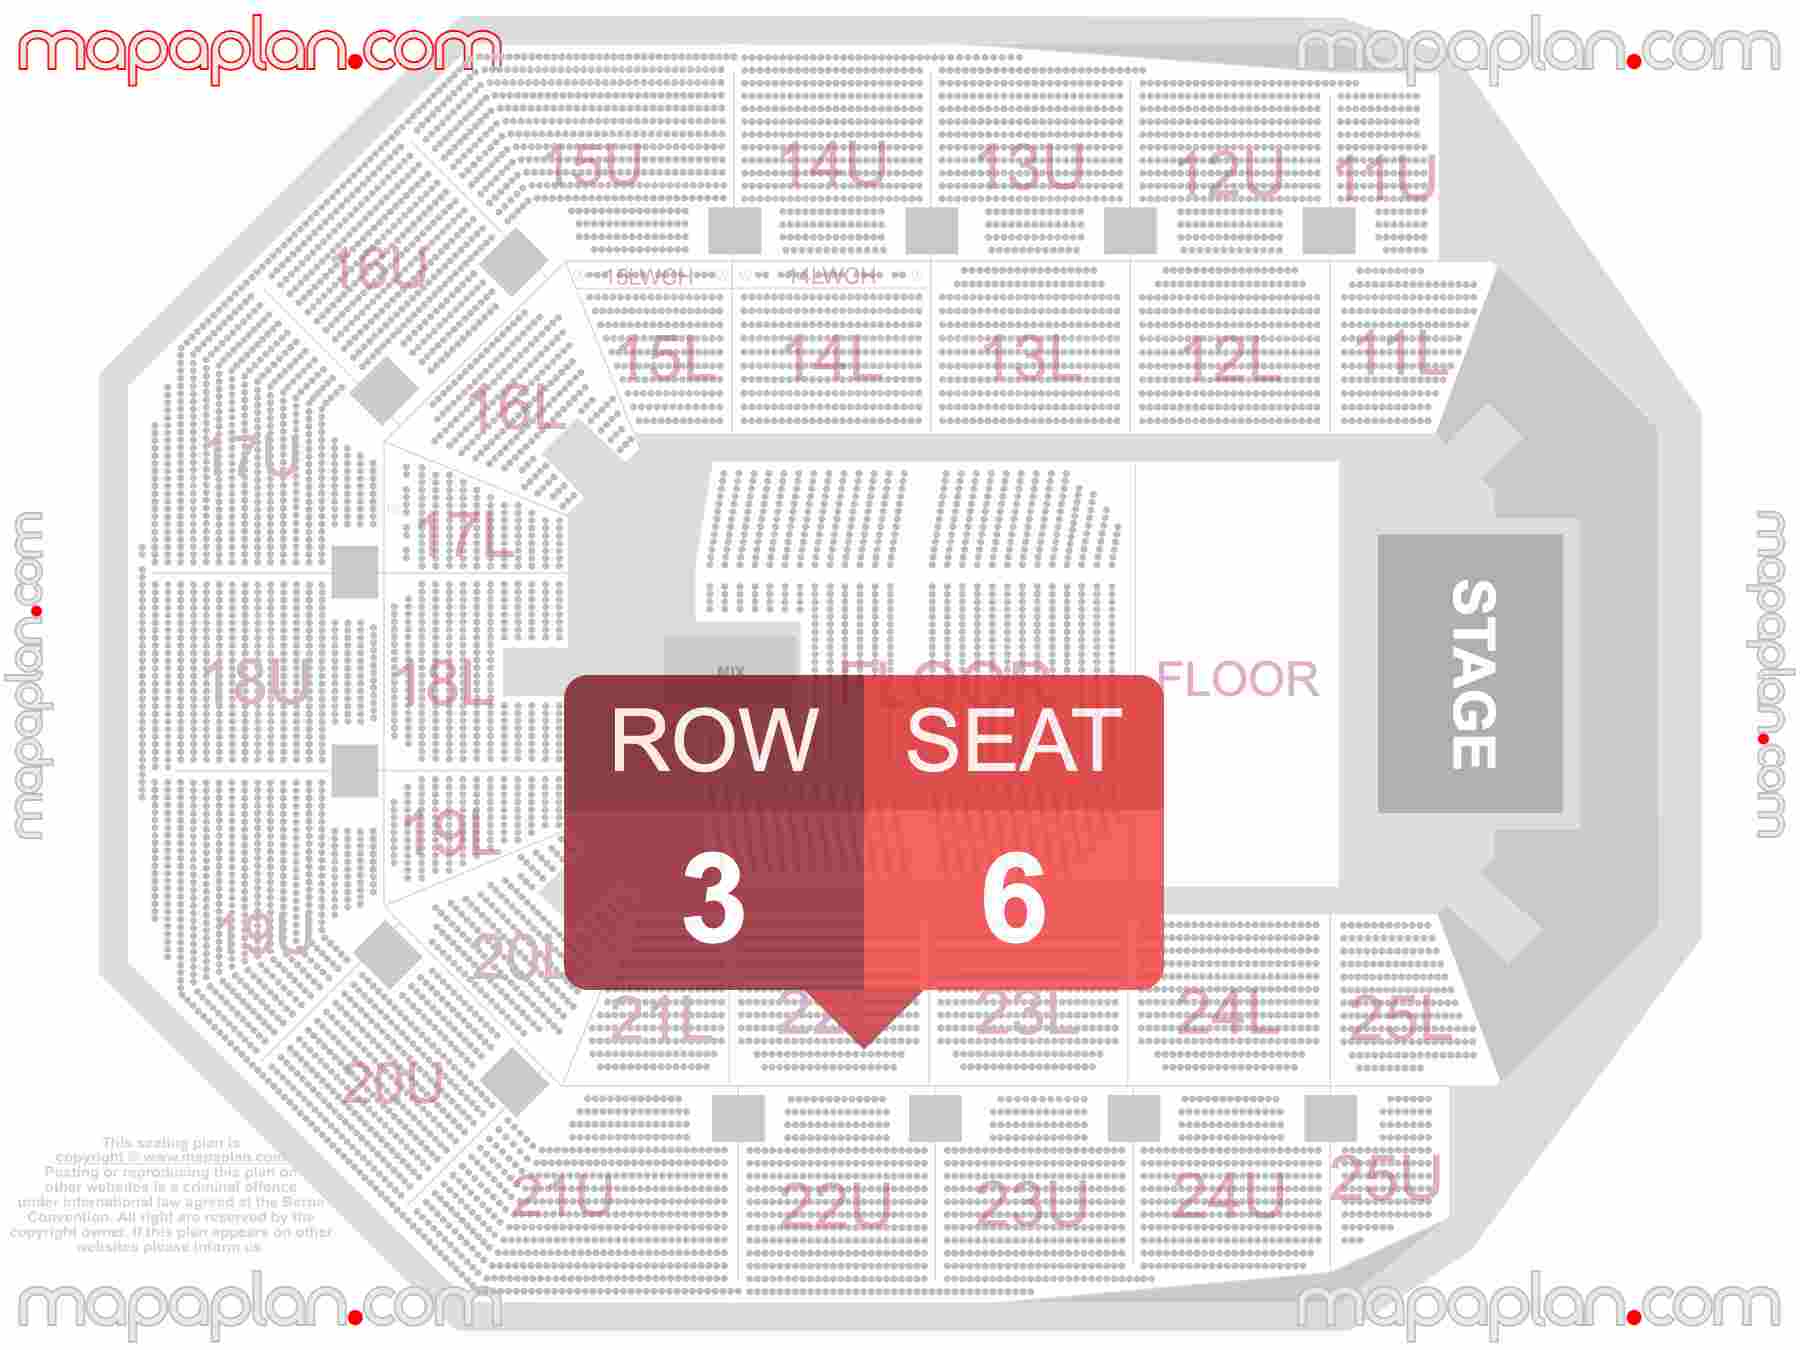 Auckland Spark Arena seating map Concert with PIT floor standing find best seats row numbering system plan showing how many seats per row - Individual 'find my seat' virtual locator